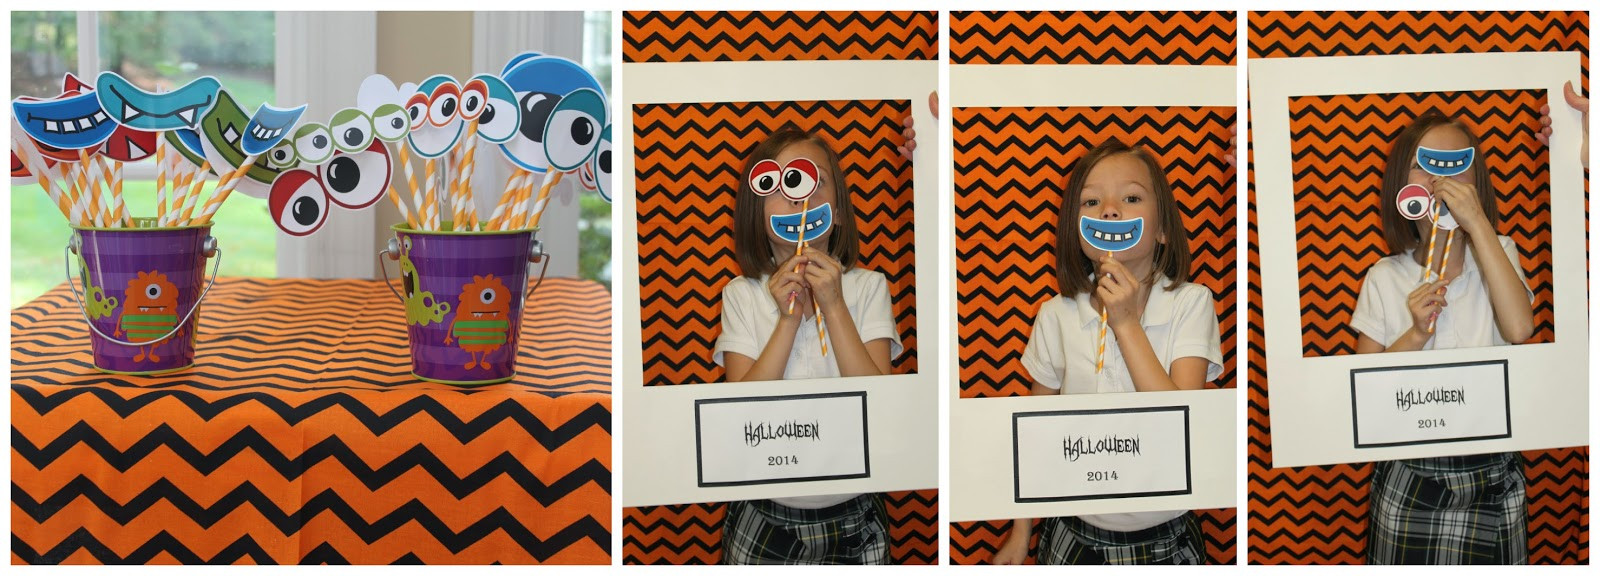 Halloween Party Ideas For 1St Graders
 Keeping up with the Kiddos 1st Grade Halloween Party